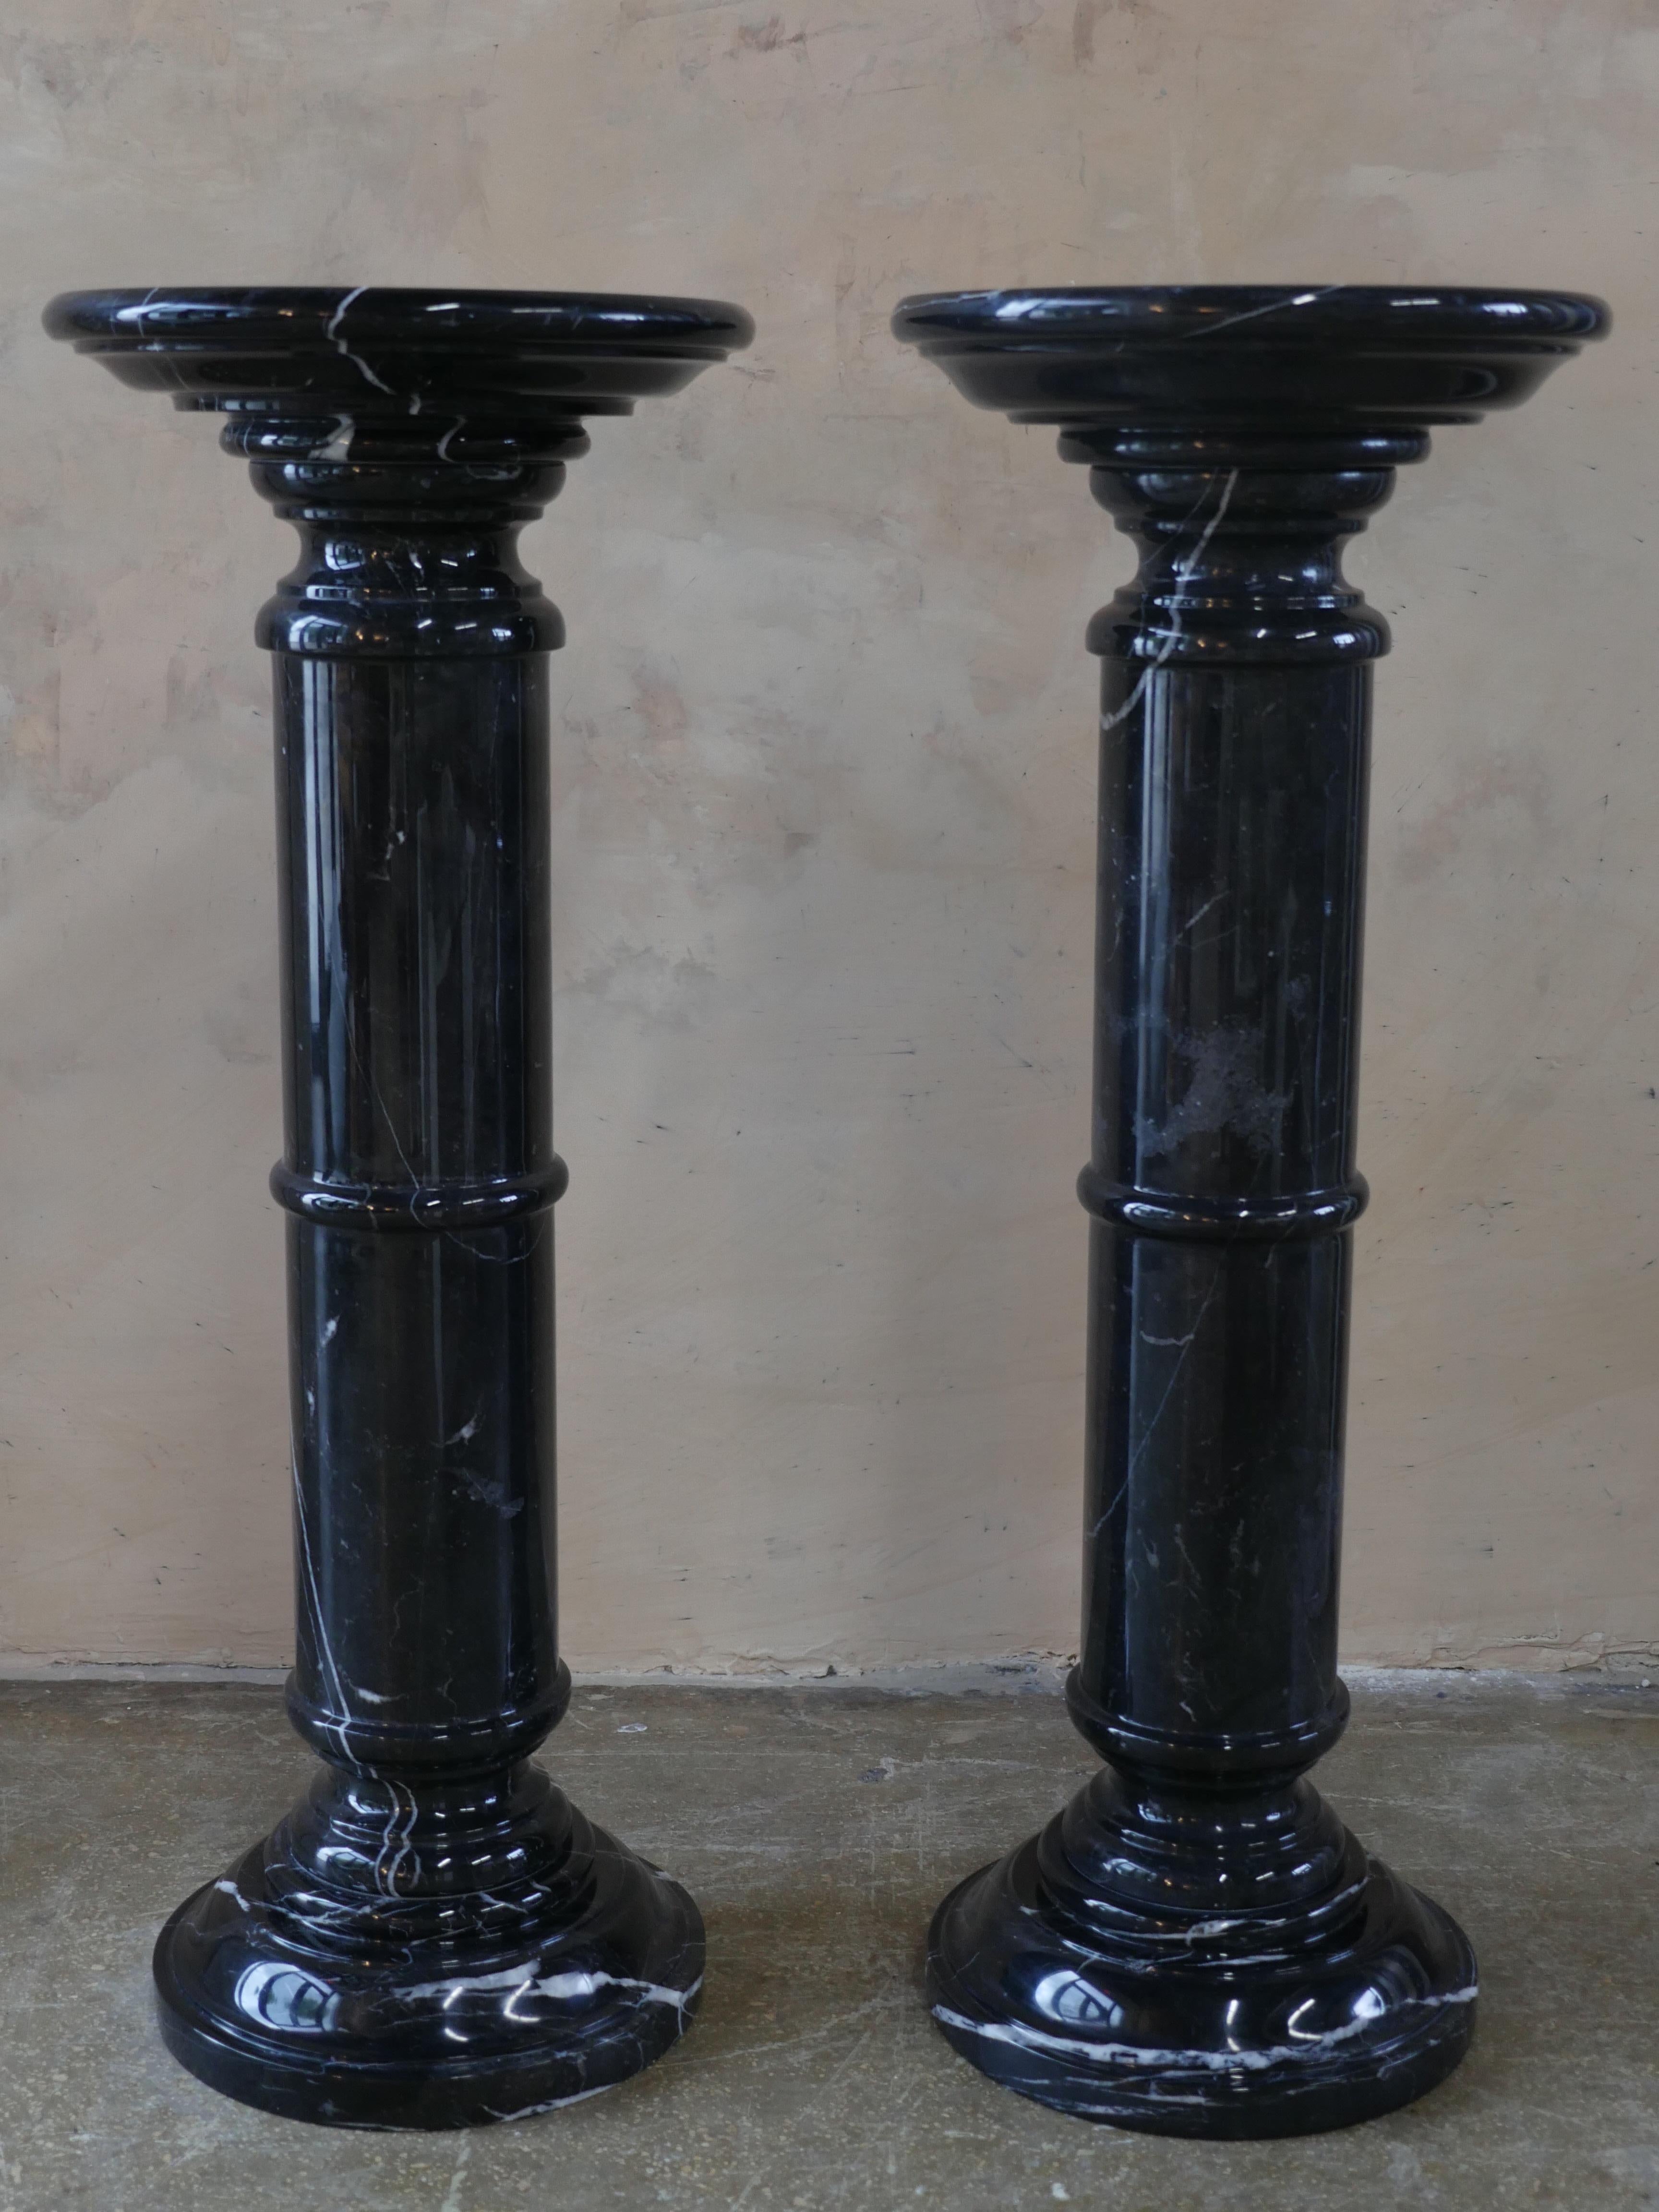 Beautiful pair of 1970s Nero Marquina solid Marble pedestals. The pedestals are in great condition as they have been professionally polished by hand, to achieve a stunning, reflective look.